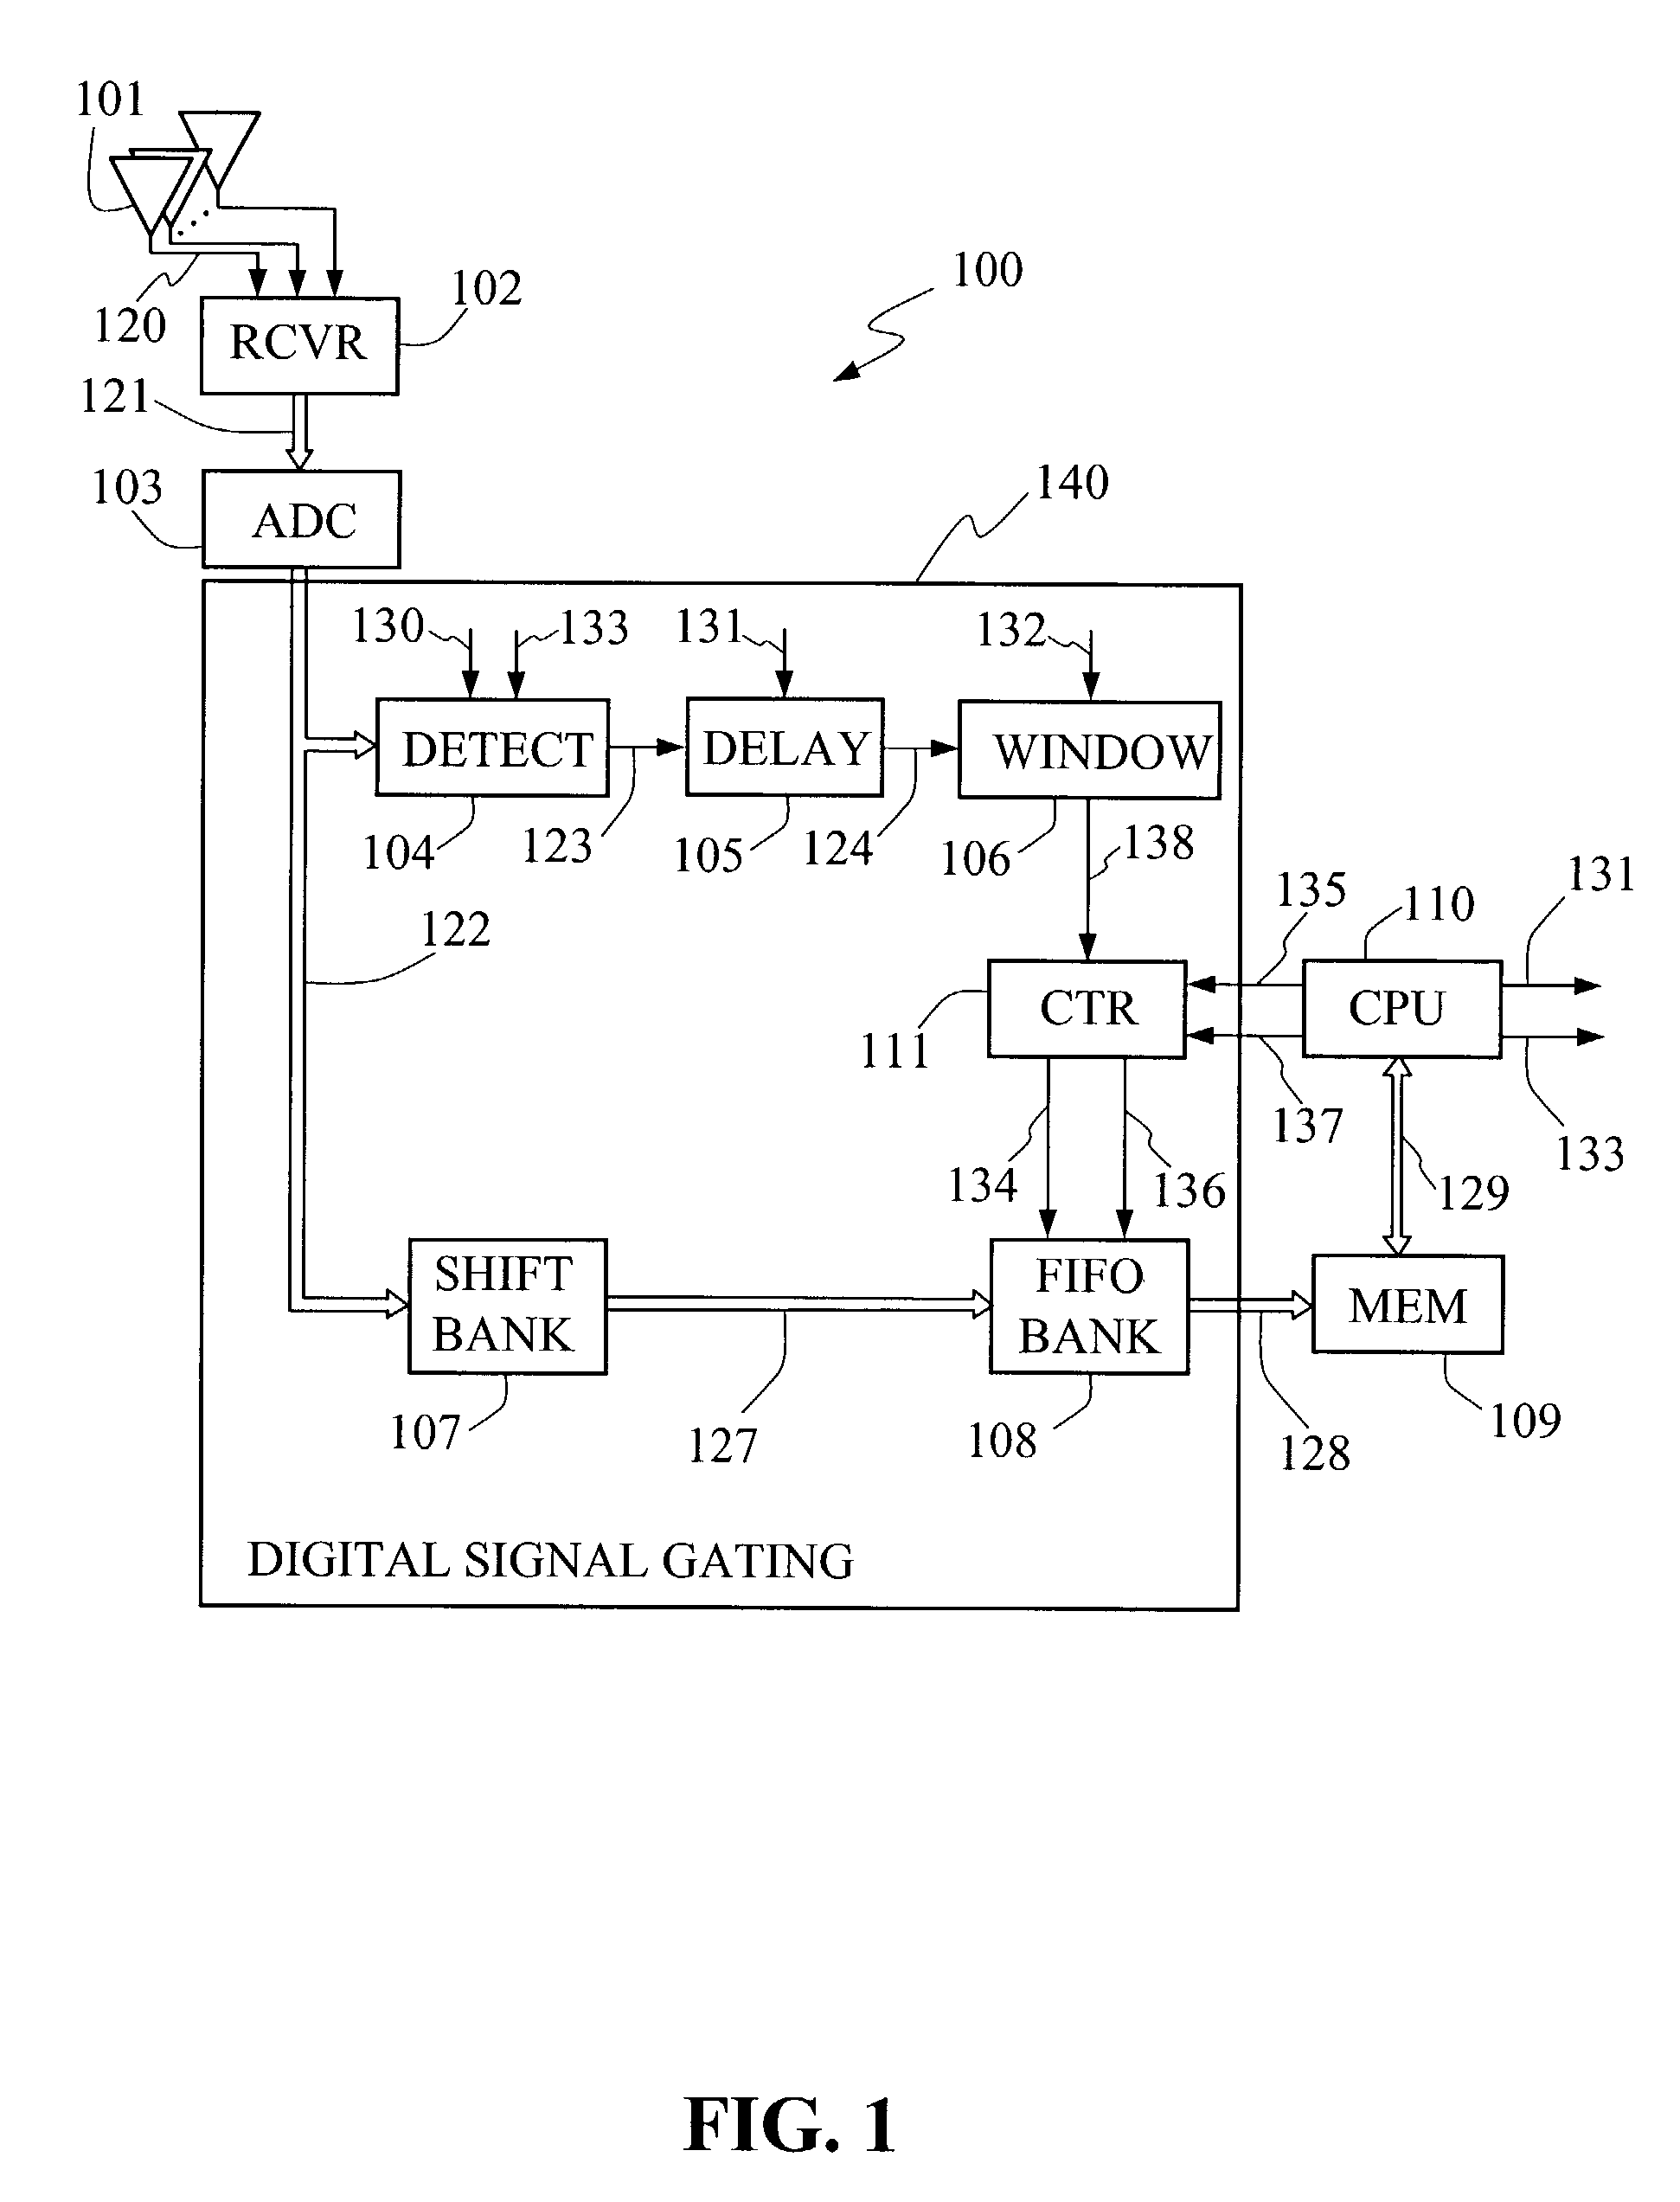 Digital signal gating apparatus and method in a pulse receiver system